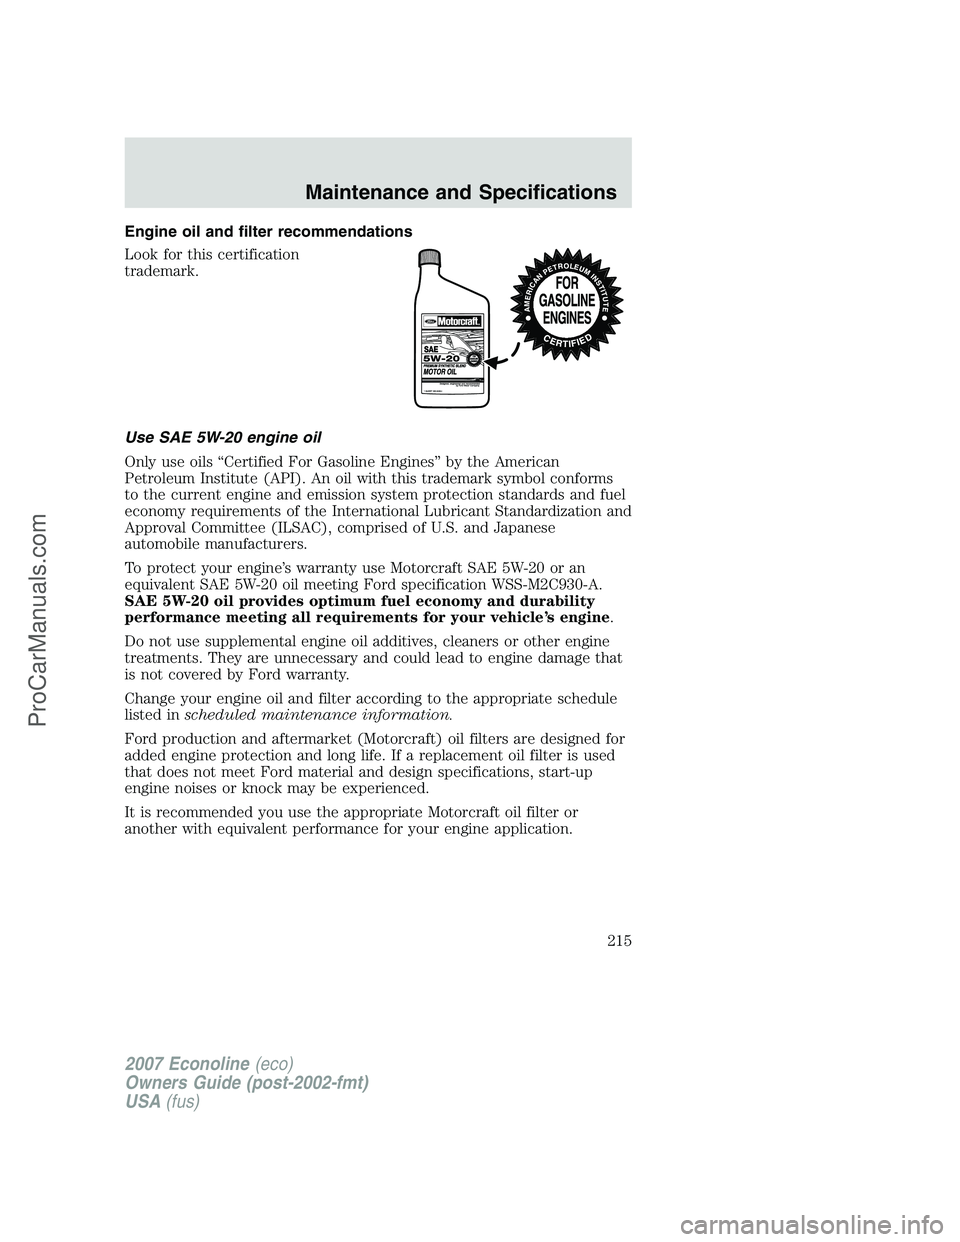 FORD E-150 2007  Owners Manual Engine oil and filter recommendations
Look for this certification
trademark.
Use SAE 5W-20 engine oil
Only use oils “Certified For Gasoline Engines” by the American
Petroleum Institute (API). An o